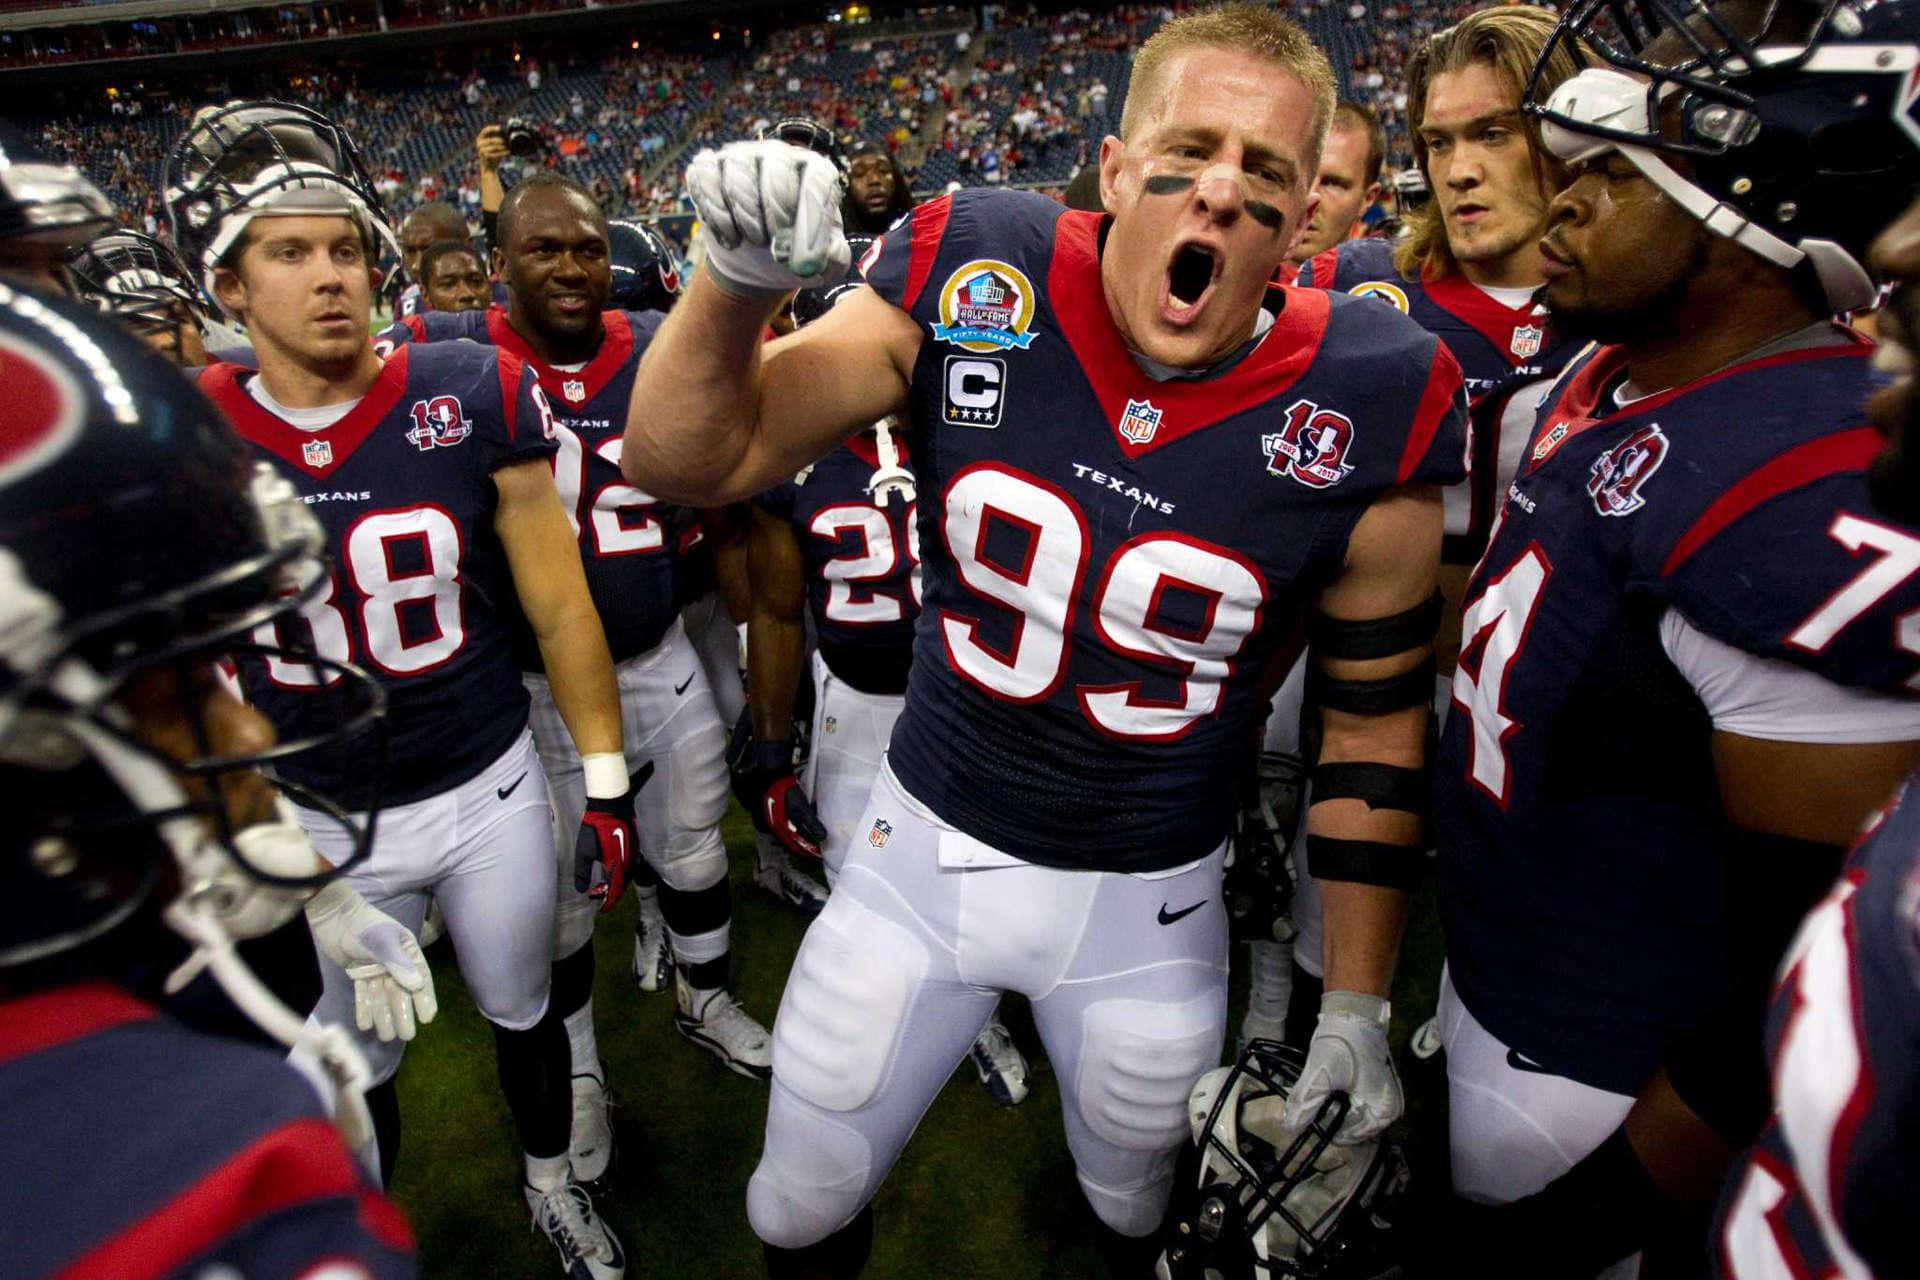 J.J. Watt looking fit and ready to take on the competition Wallpaper